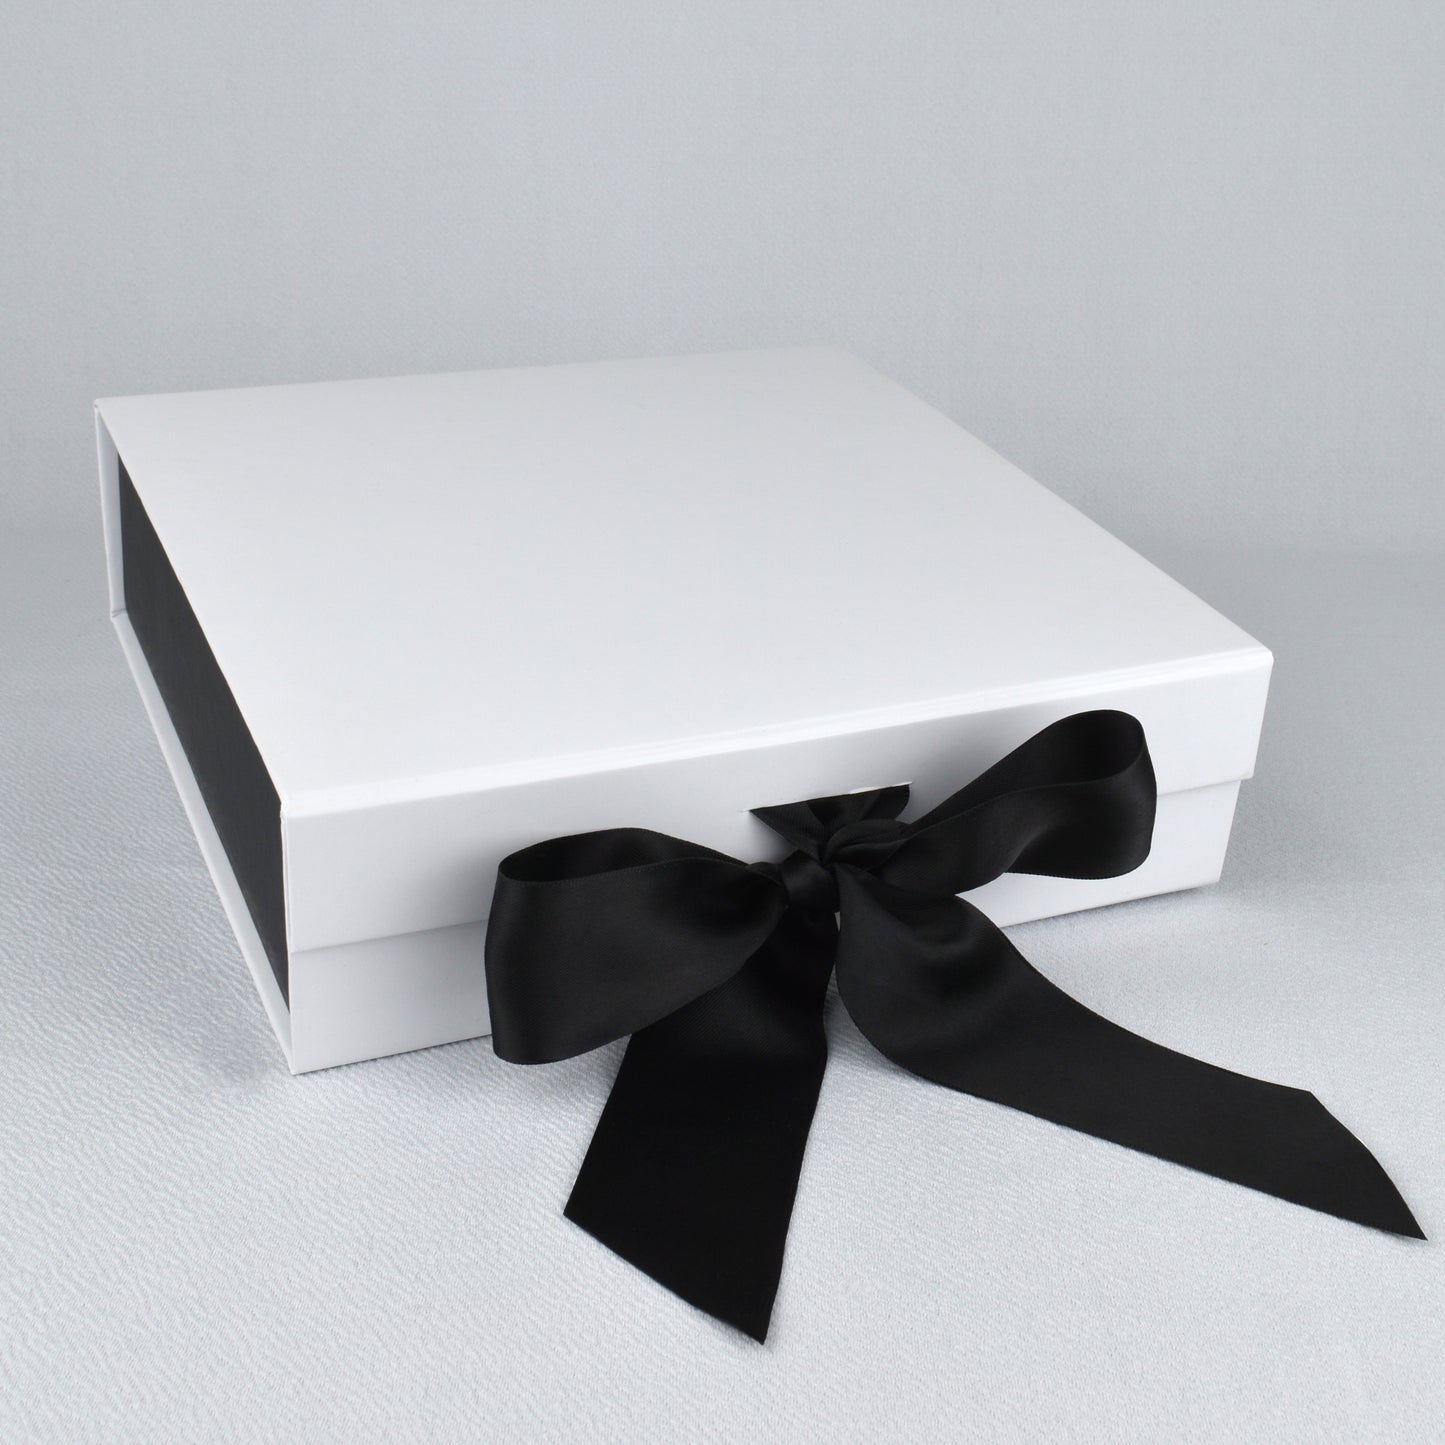 SQUARE Premium Gift Box with Satin Ribbon and Magnetic Closure (8.75" x 8.75" x 2.55")